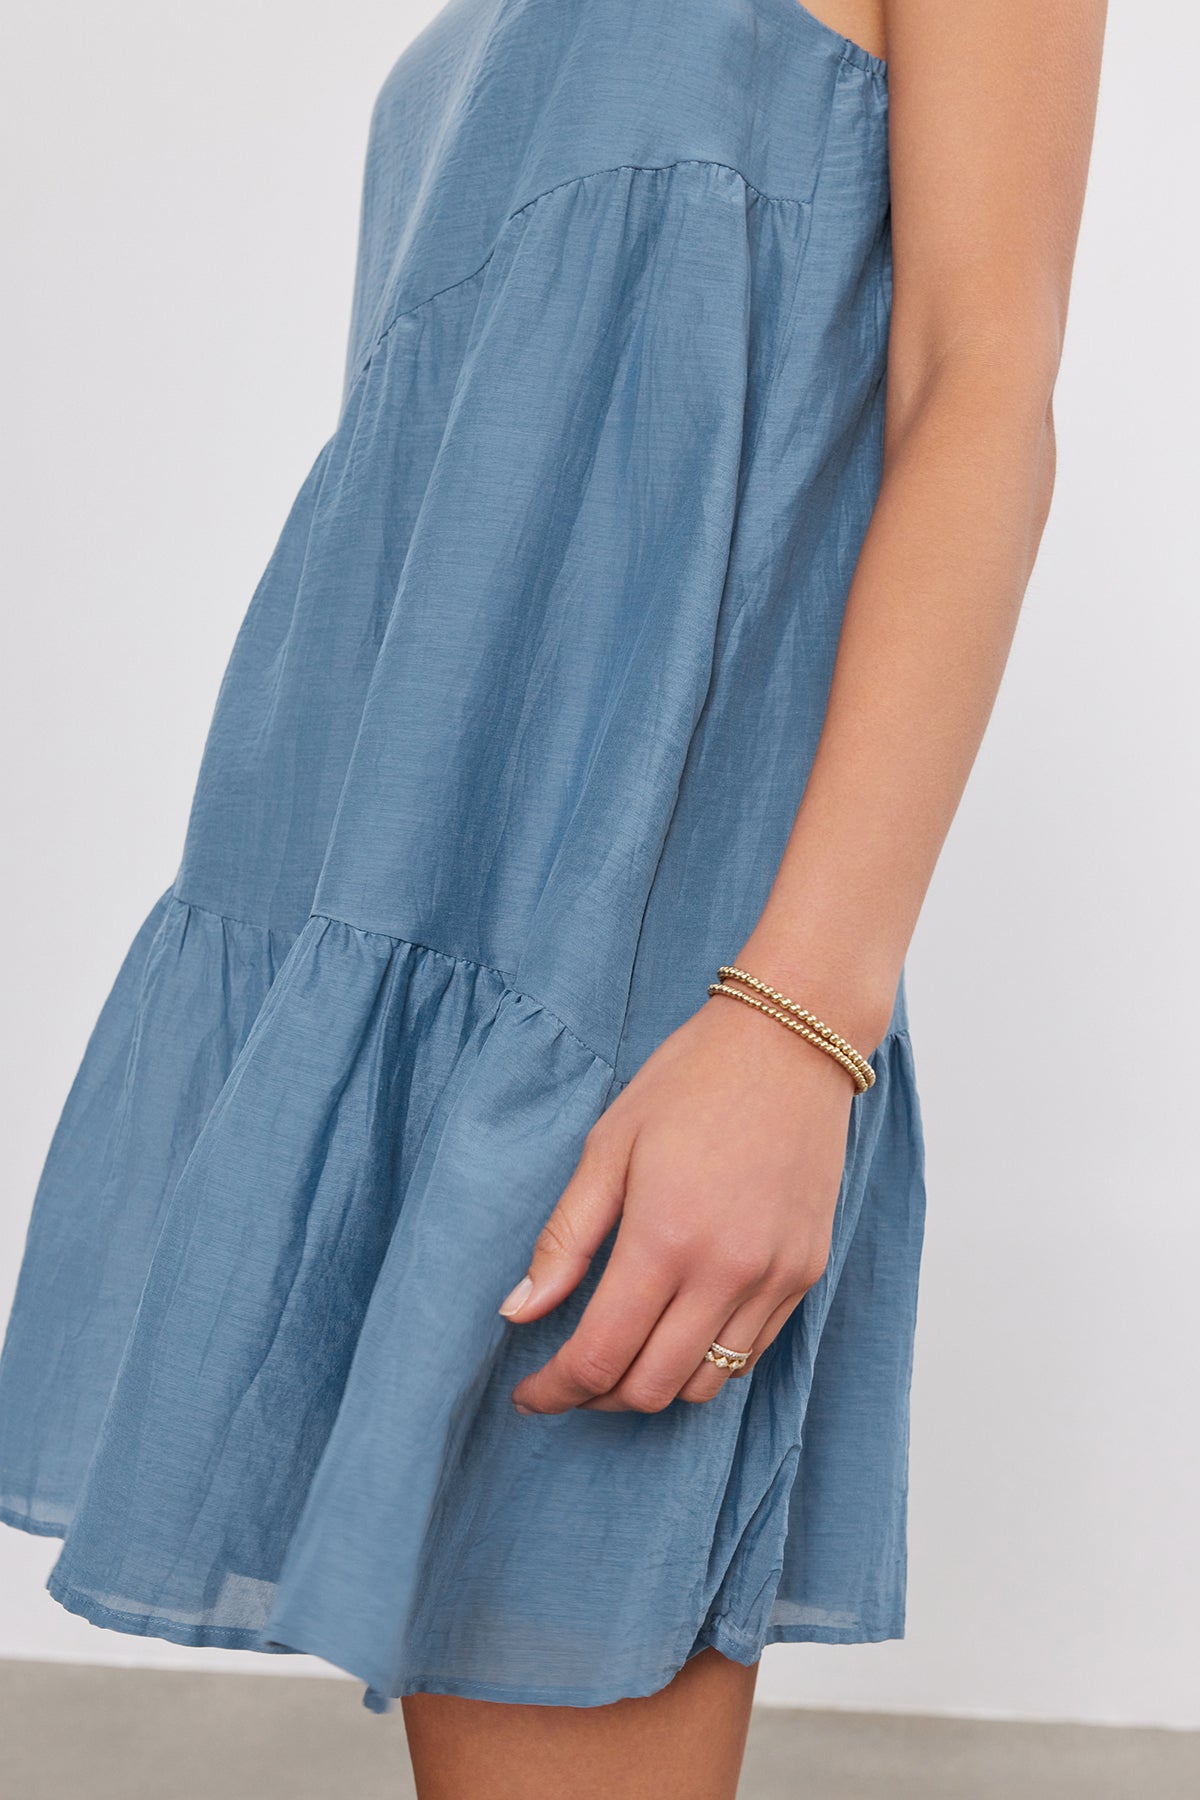   A person wearing a blue asymmetrical tiered SUZIE DRESS by Velvet by Graham & Spencer and a gold bracelet, showing their arm and some of the dress's fabric. 